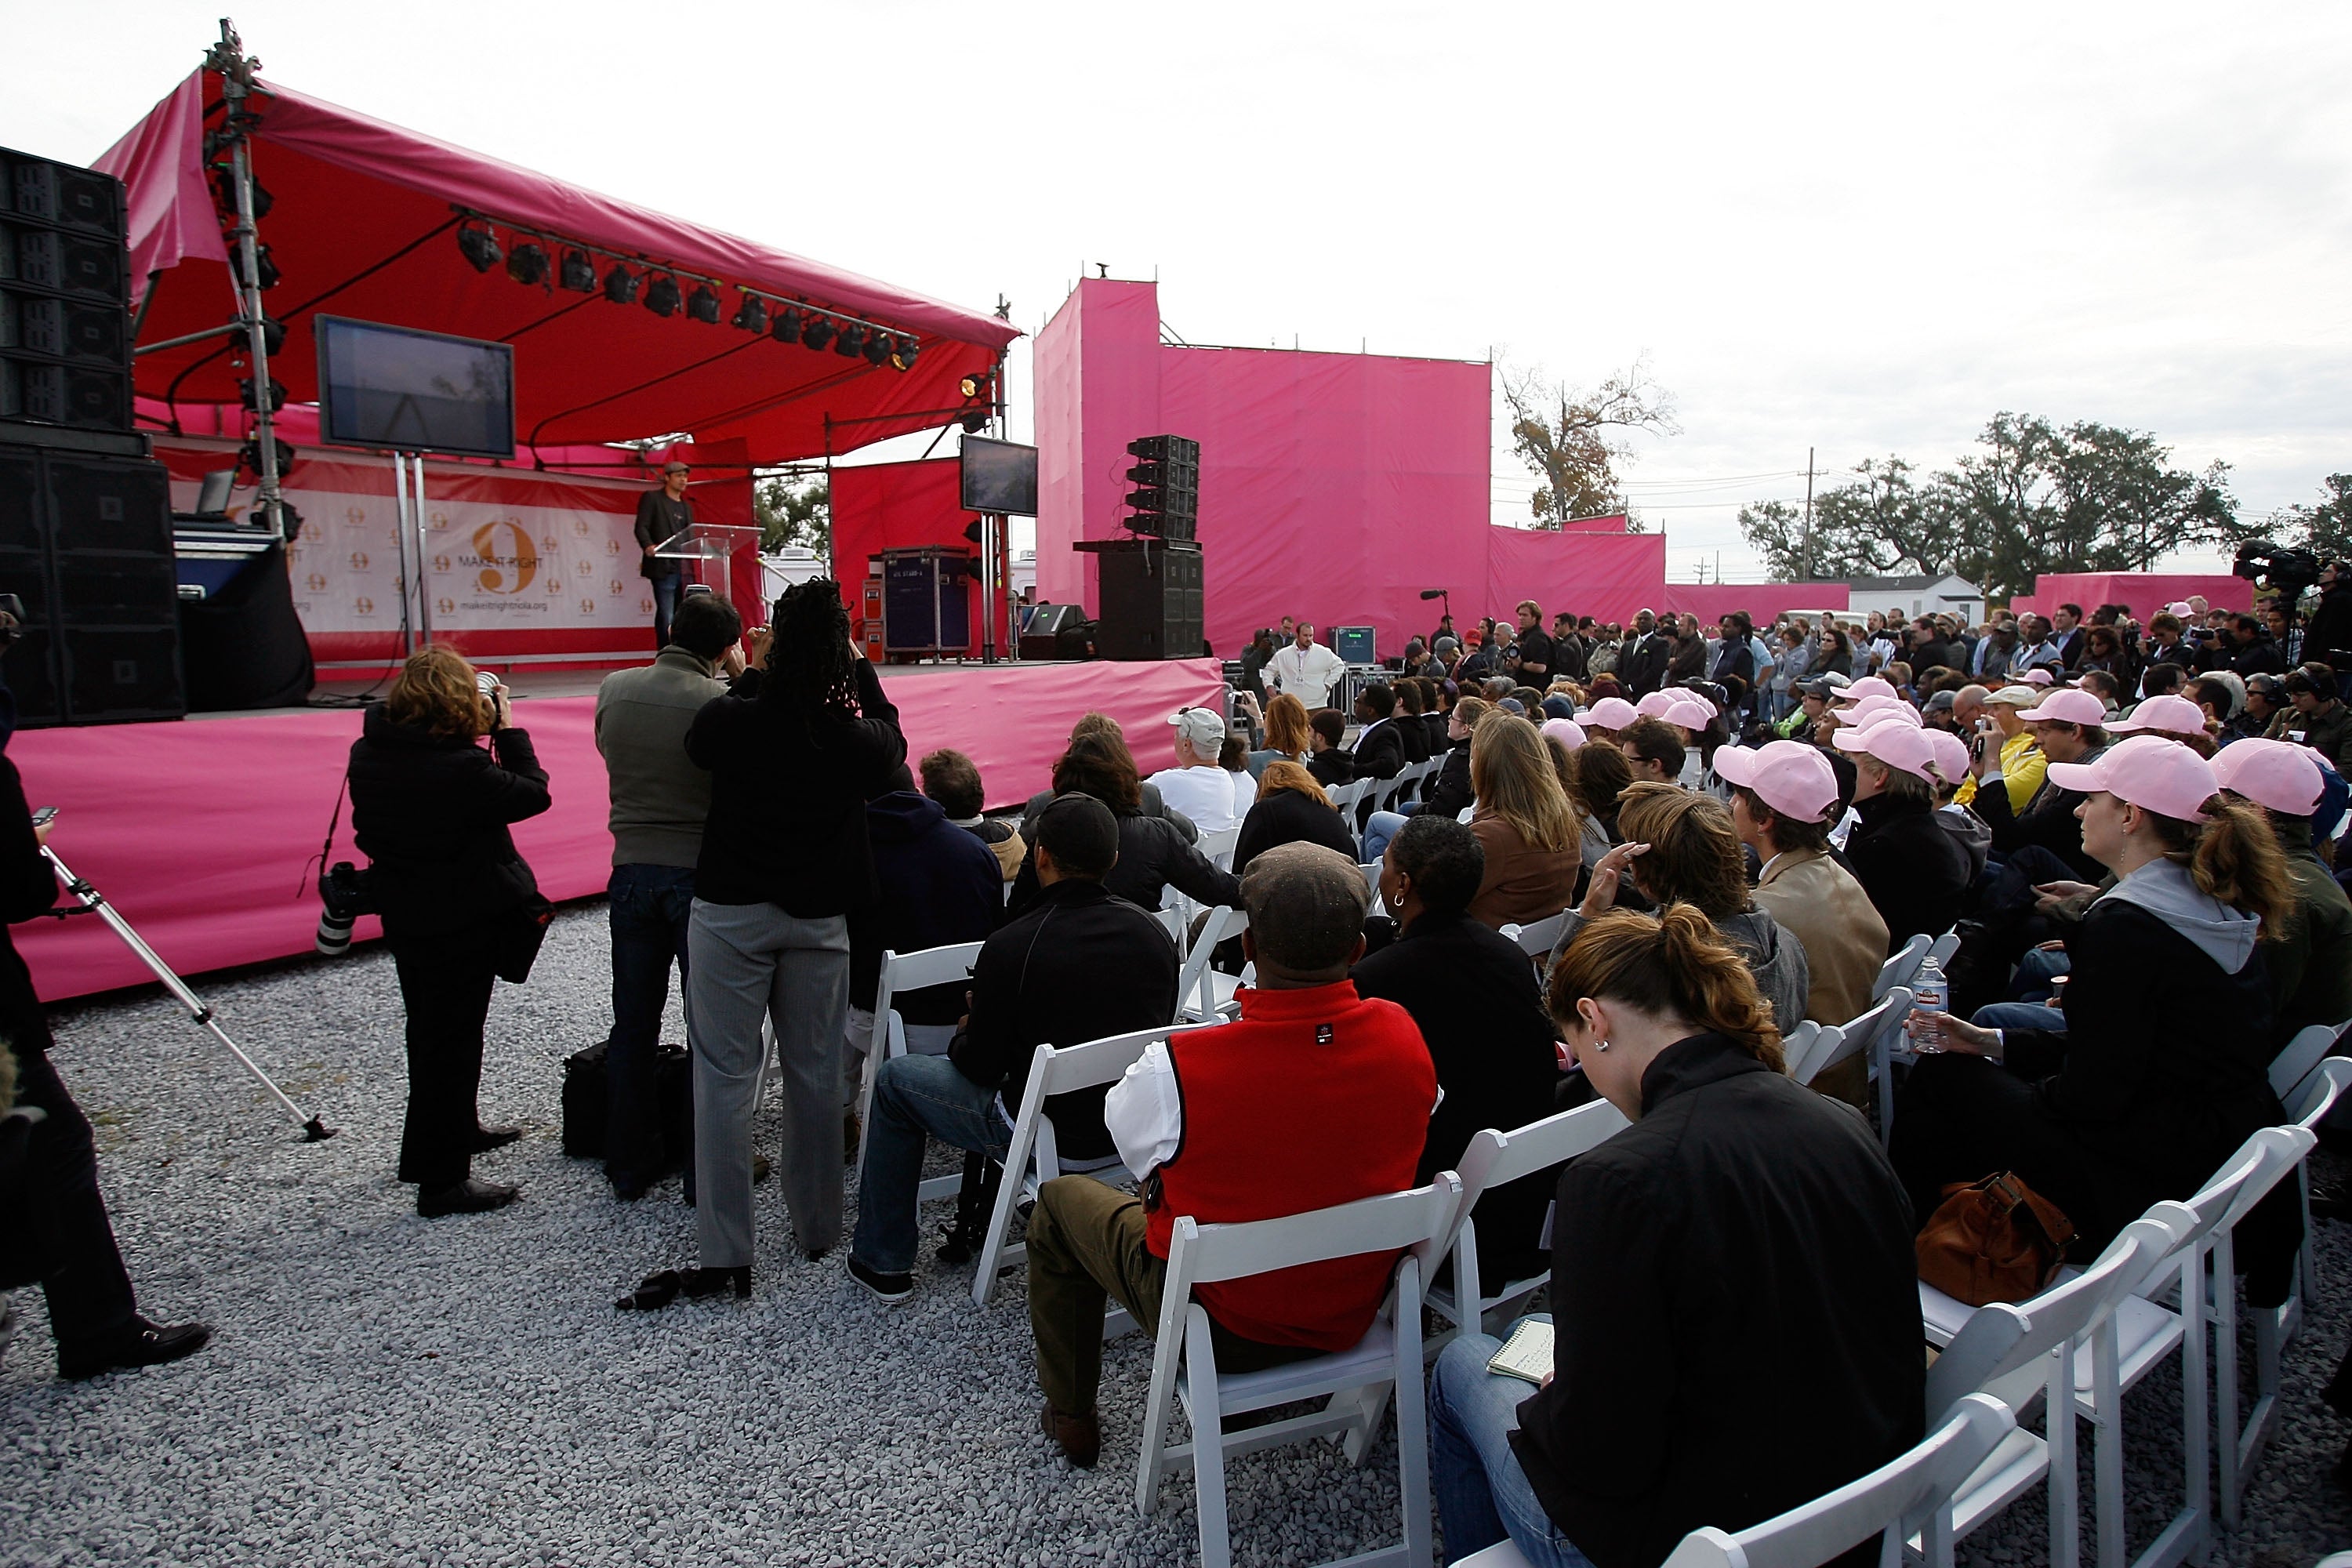 Pitt speaking at the unveiling of plans for the homes in 2007